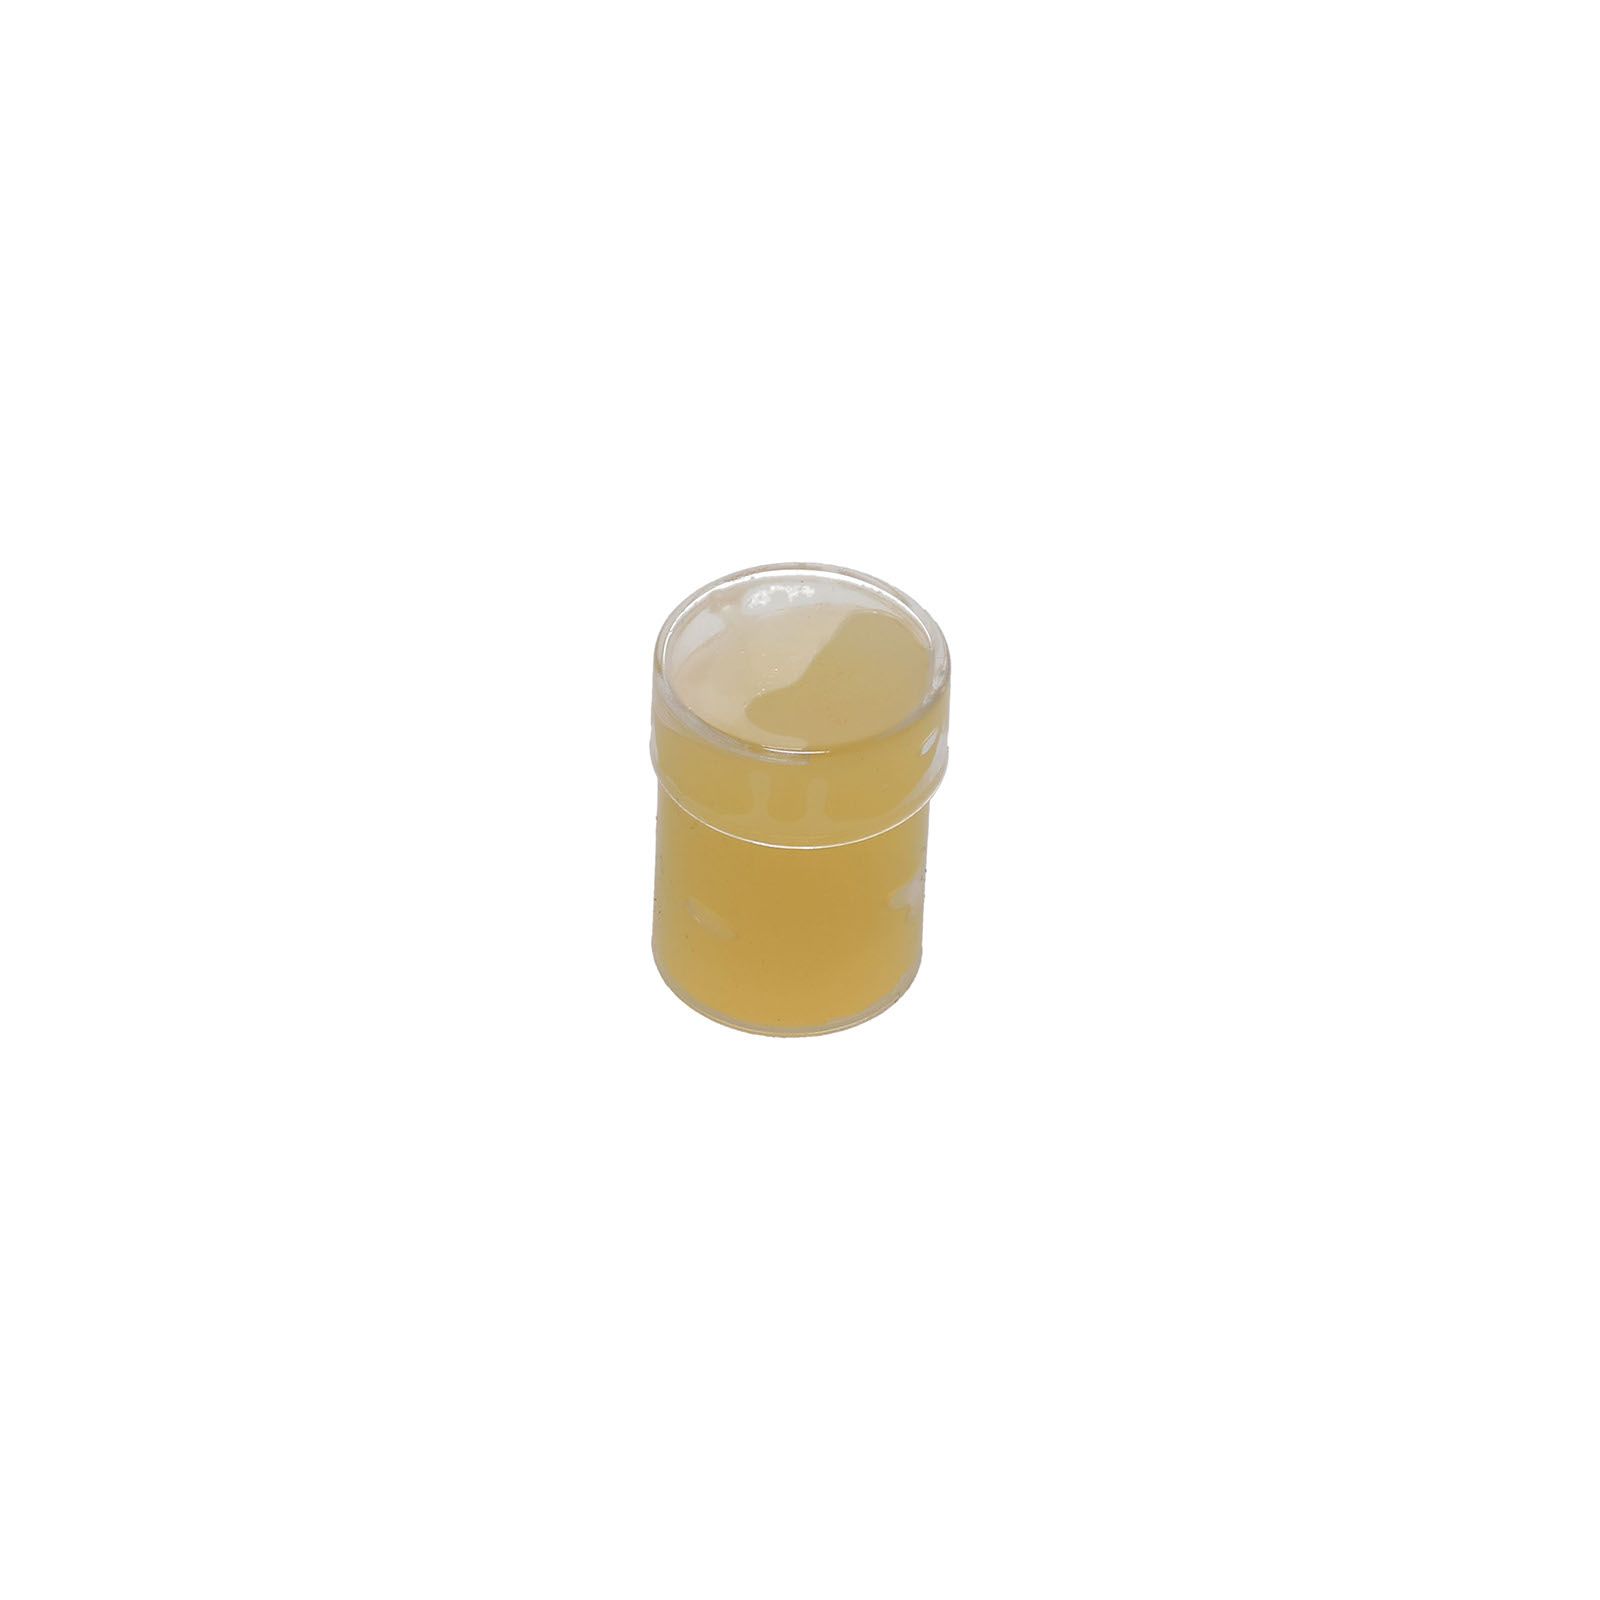 GREASE KIT - 5g product photo